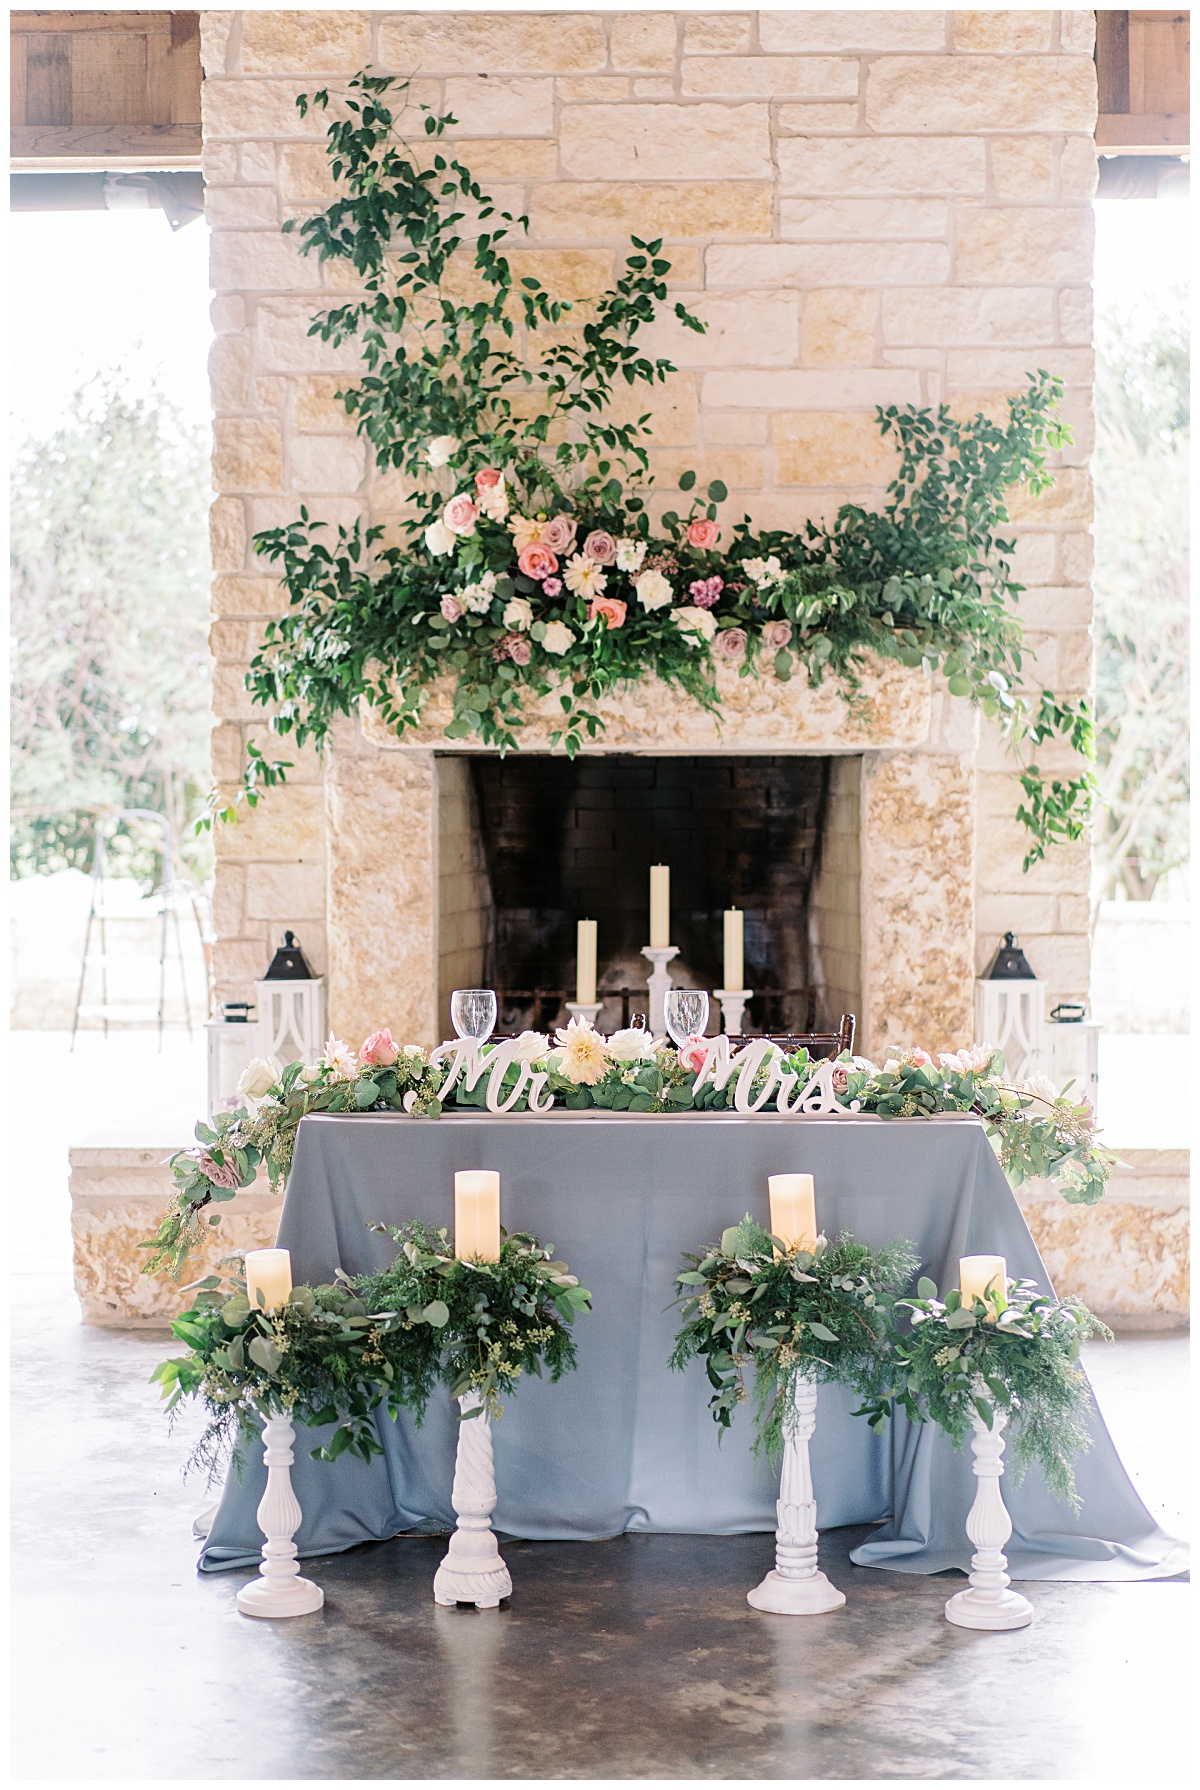 Wild and Lush Vintage Garden theme design at Houston's only Wedding Winery Venue | Emery's Buffalo Creek 